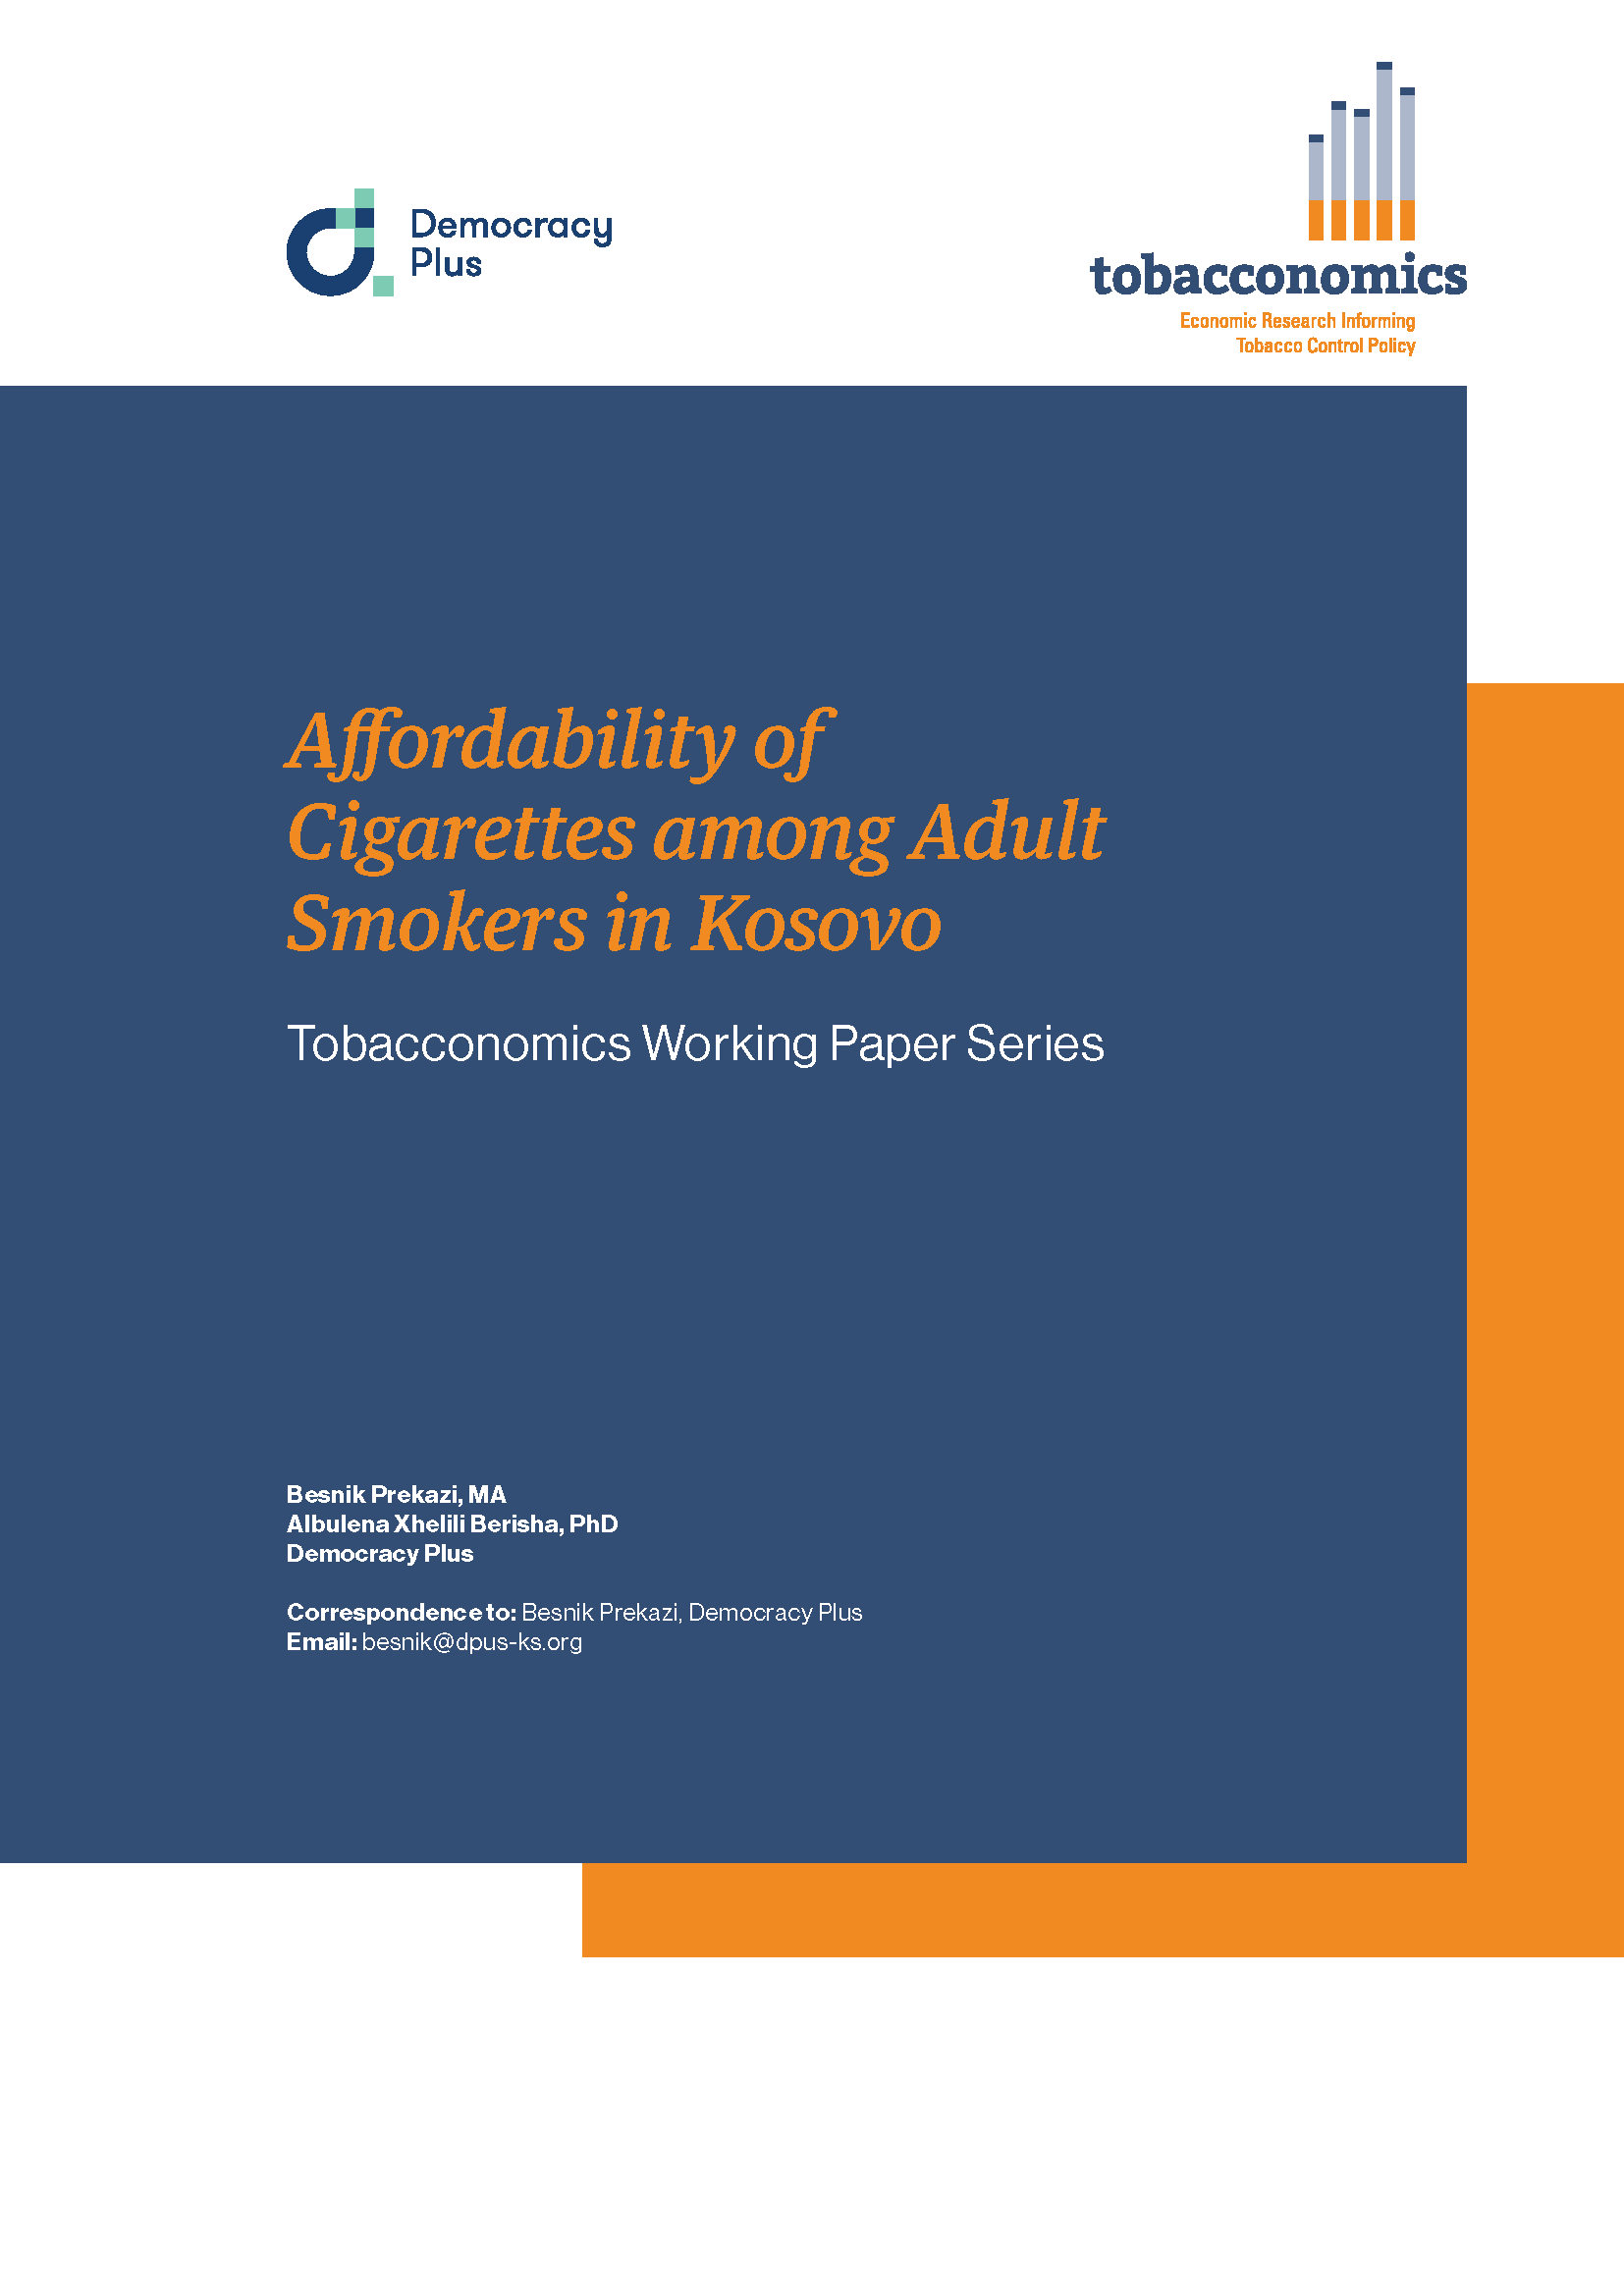 Affordability of Cigarettes among Adult Smokers in Kosovo